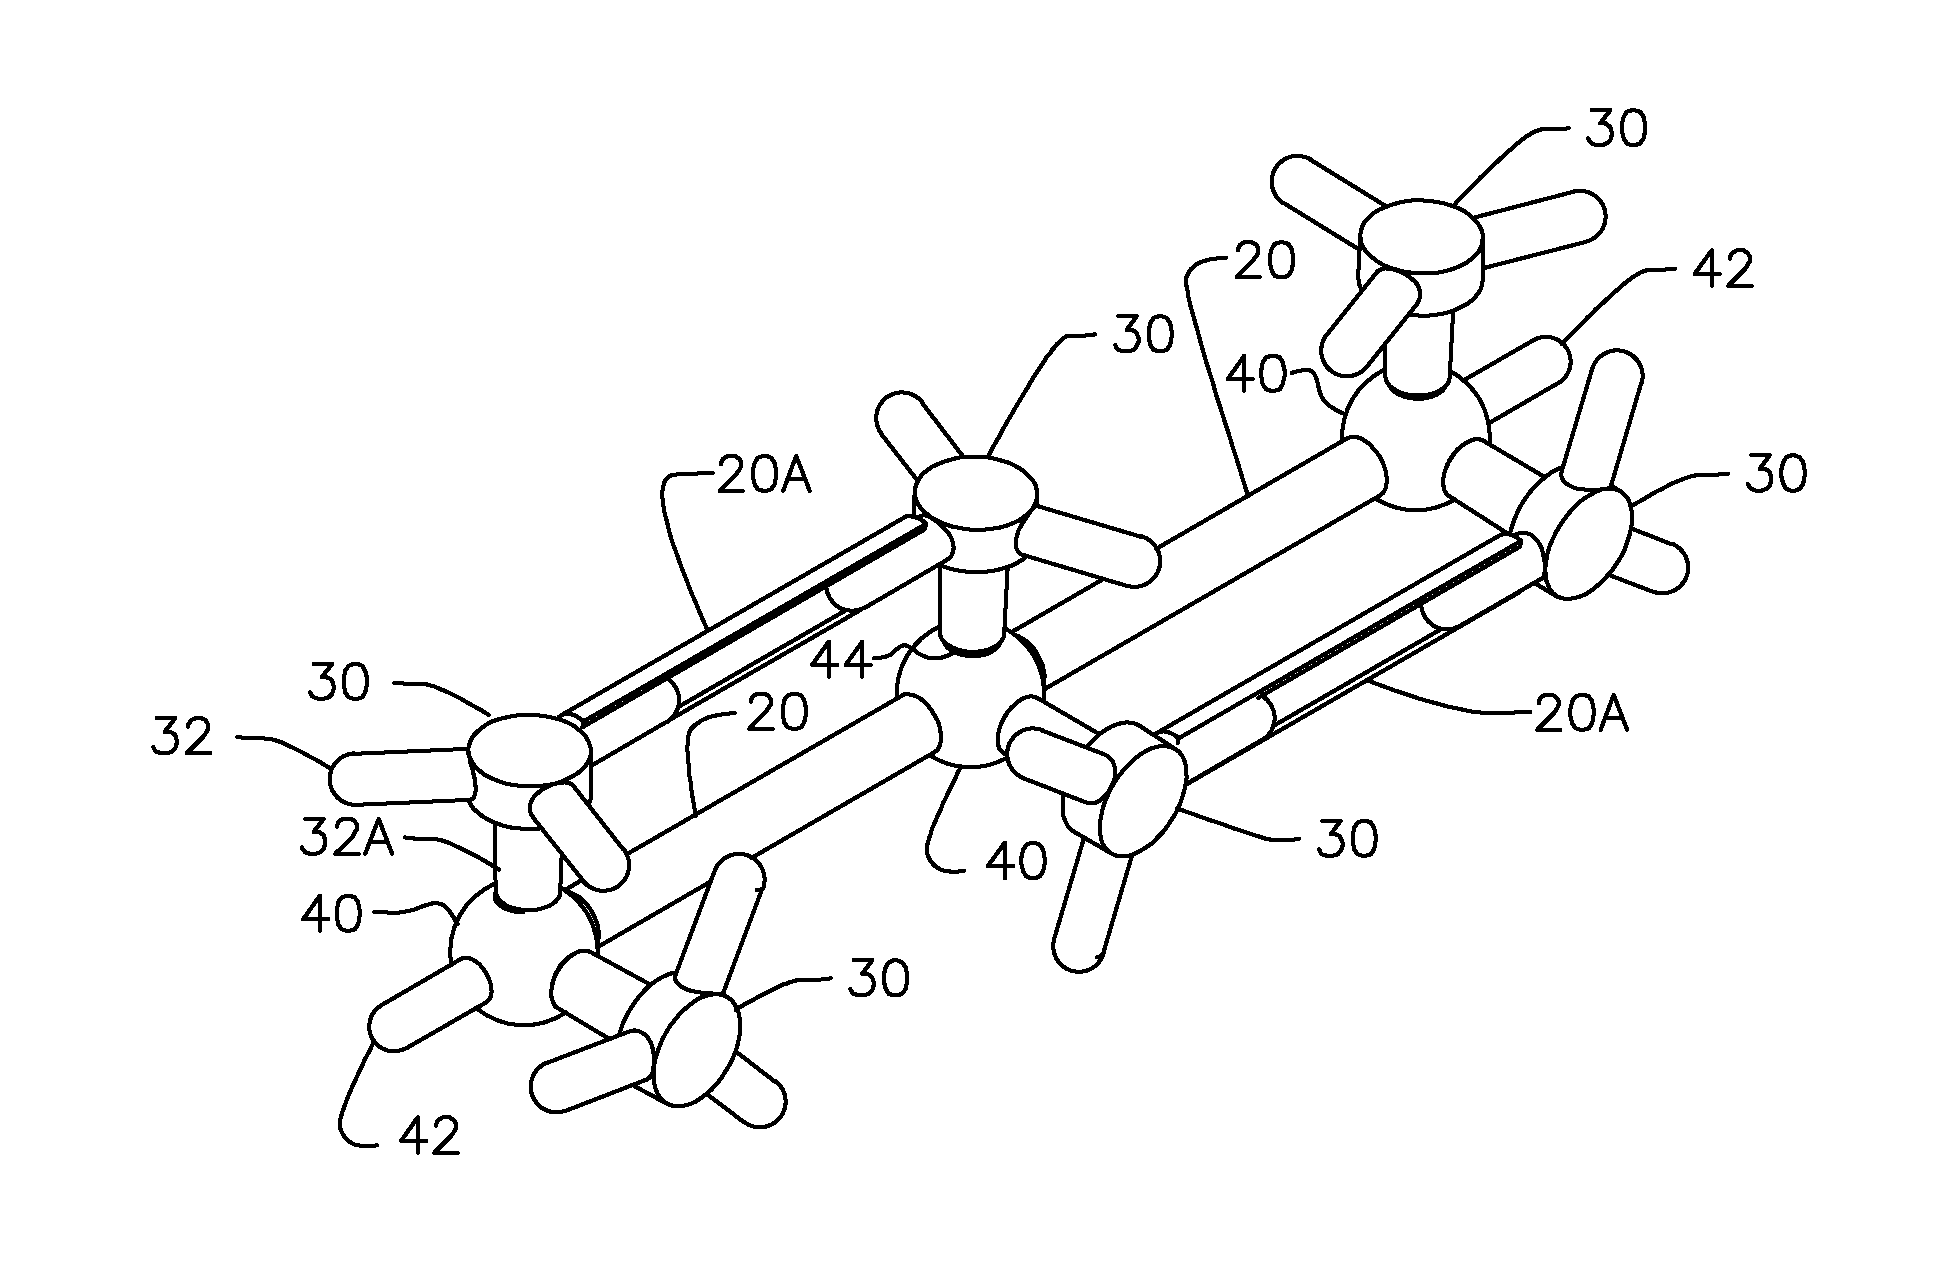 Molecular modeling system including multiple pi-bond exclusionary features